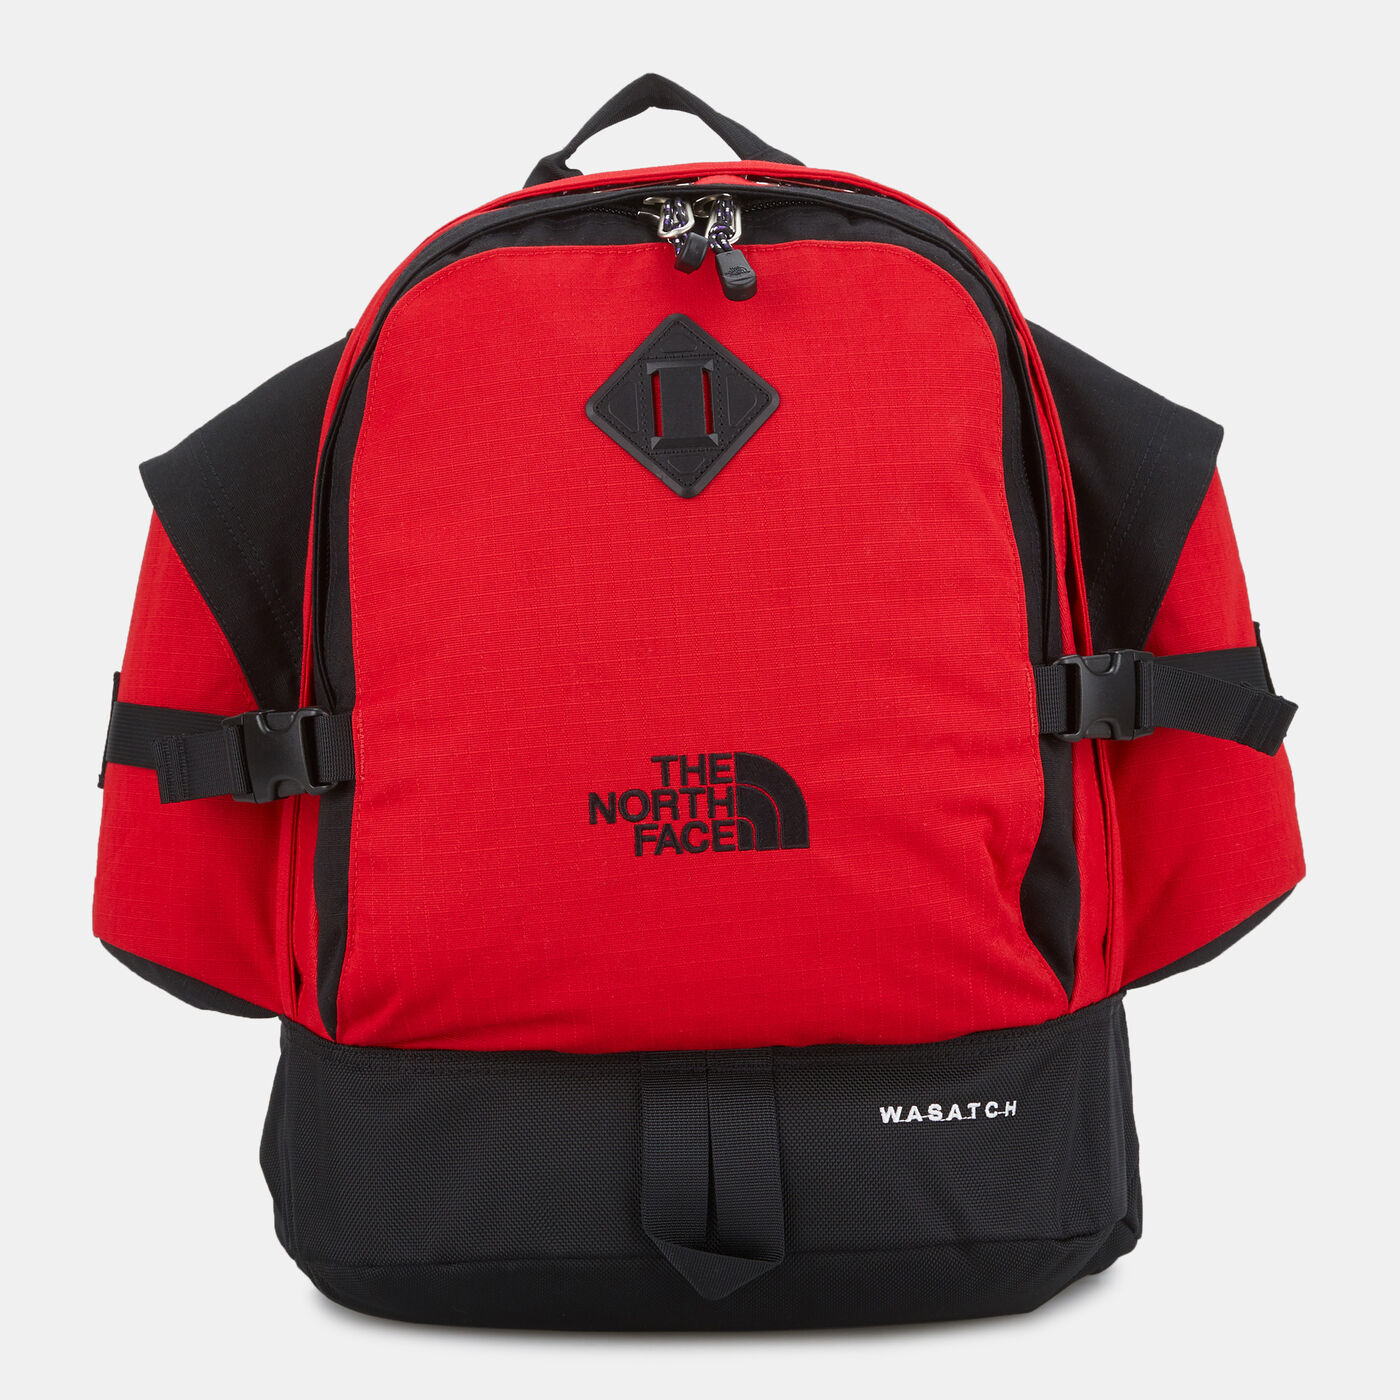 Wasatch Reissue Backpack